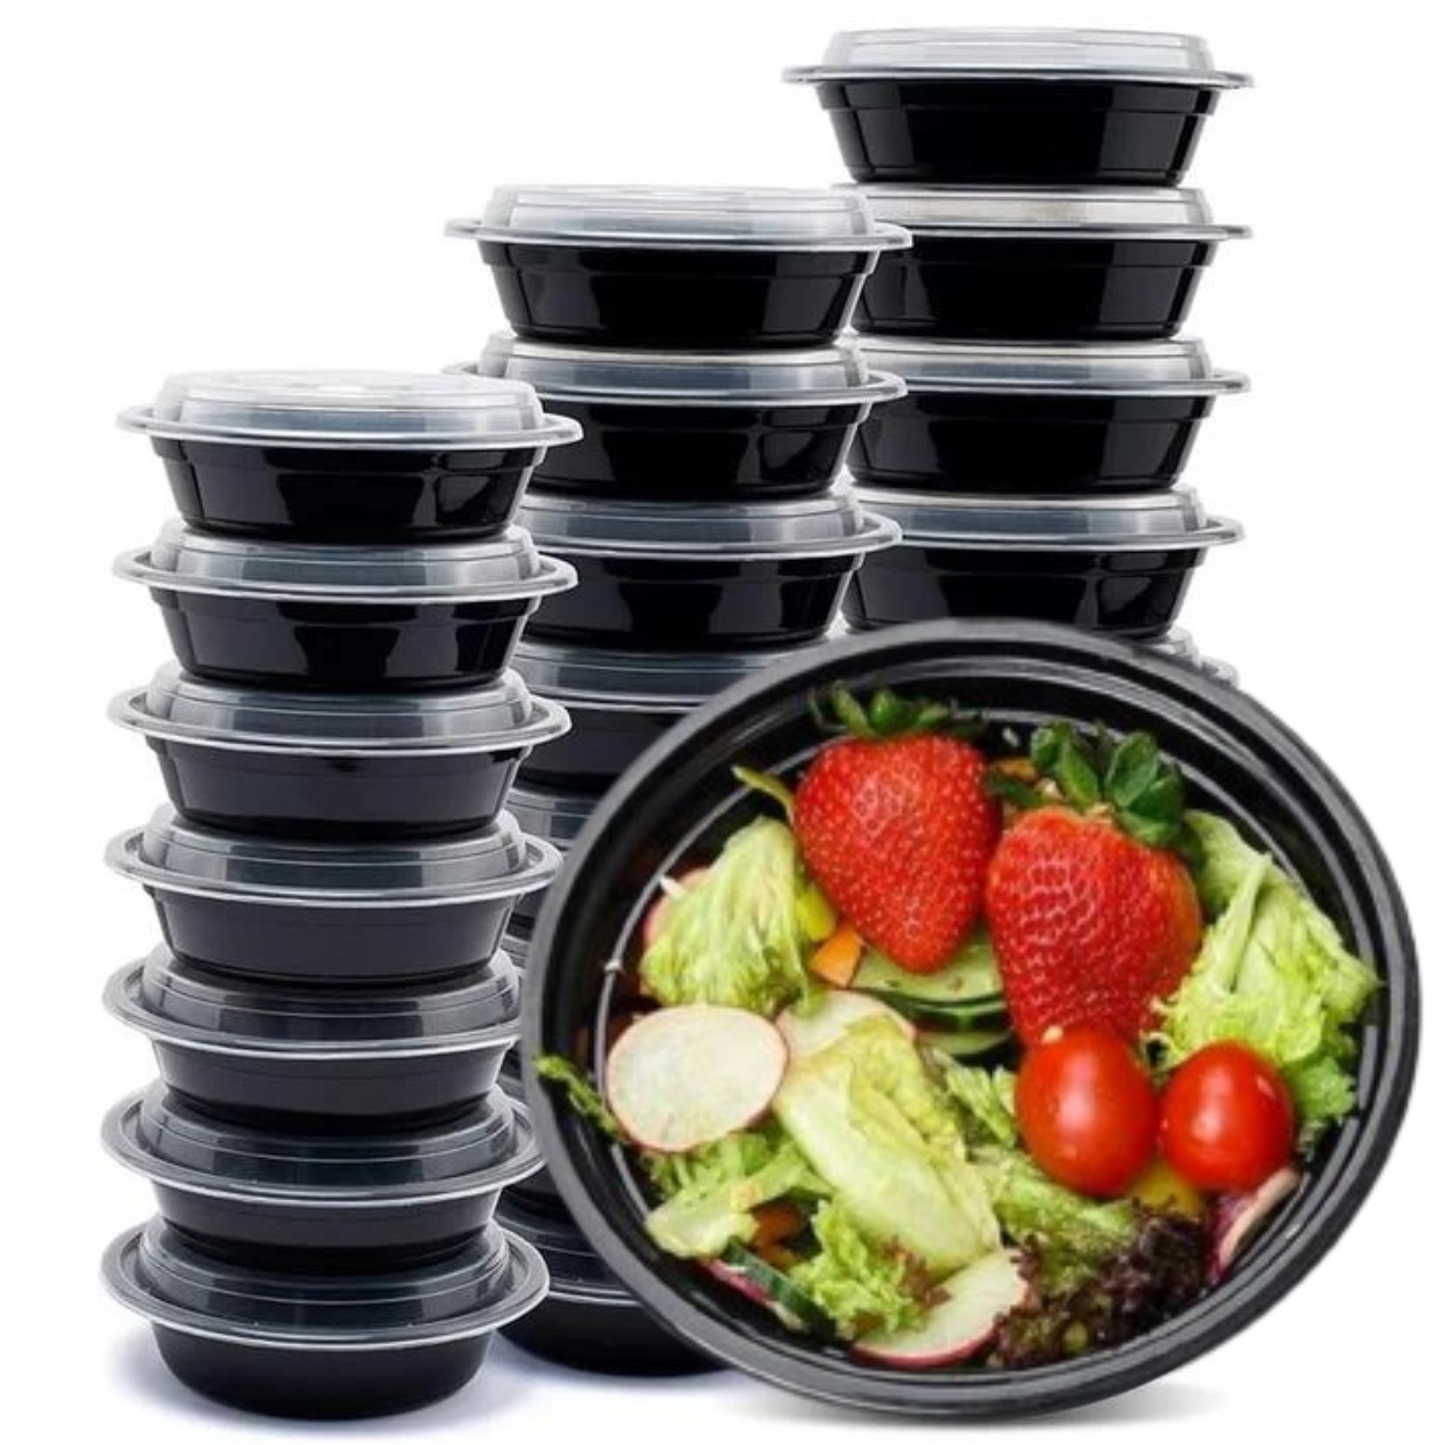 *WHOLESALE*  48oz Black Meal Prep/ Bento Box Container with Clear Lid | 150ct/Case Food Storage & Serving VeZee   